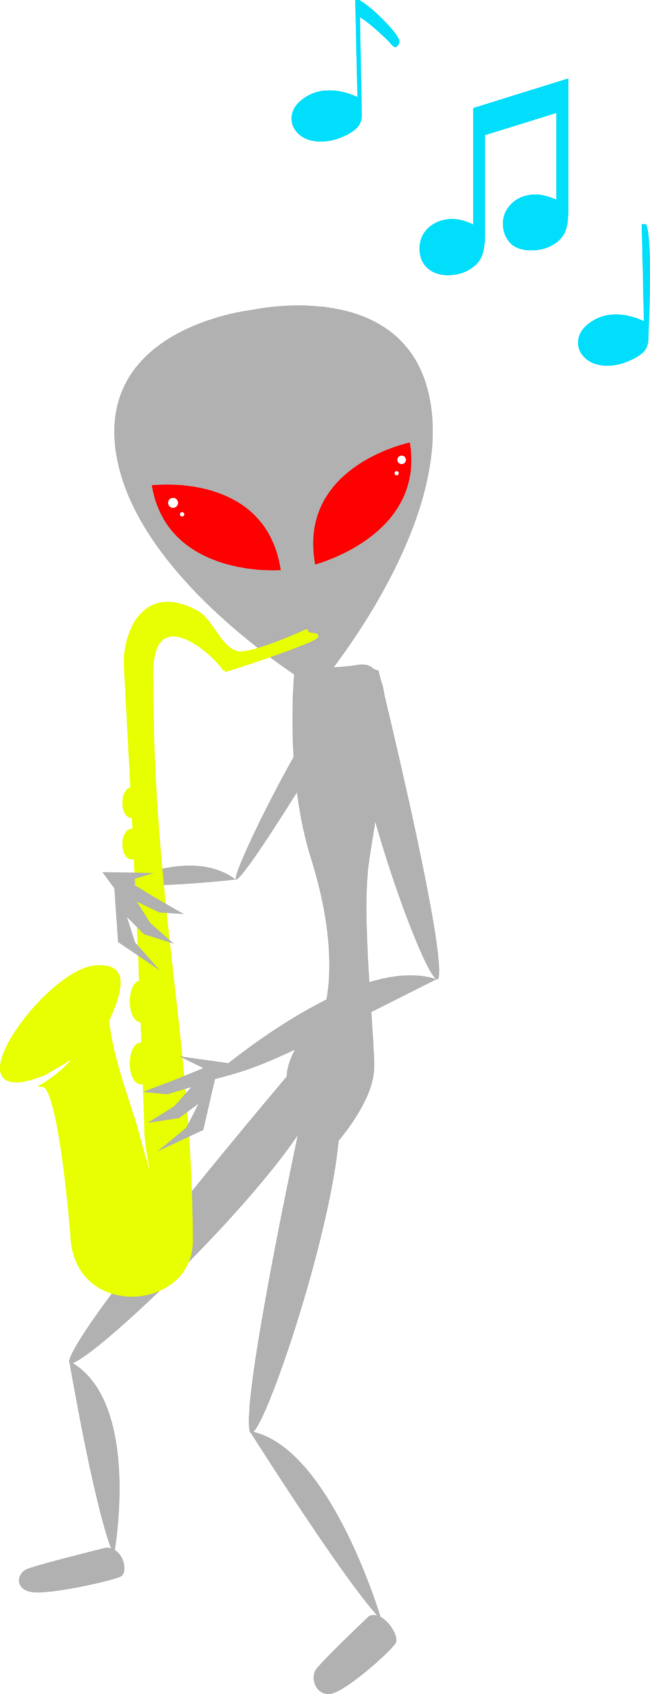 Alien Jazz by roswellboutique